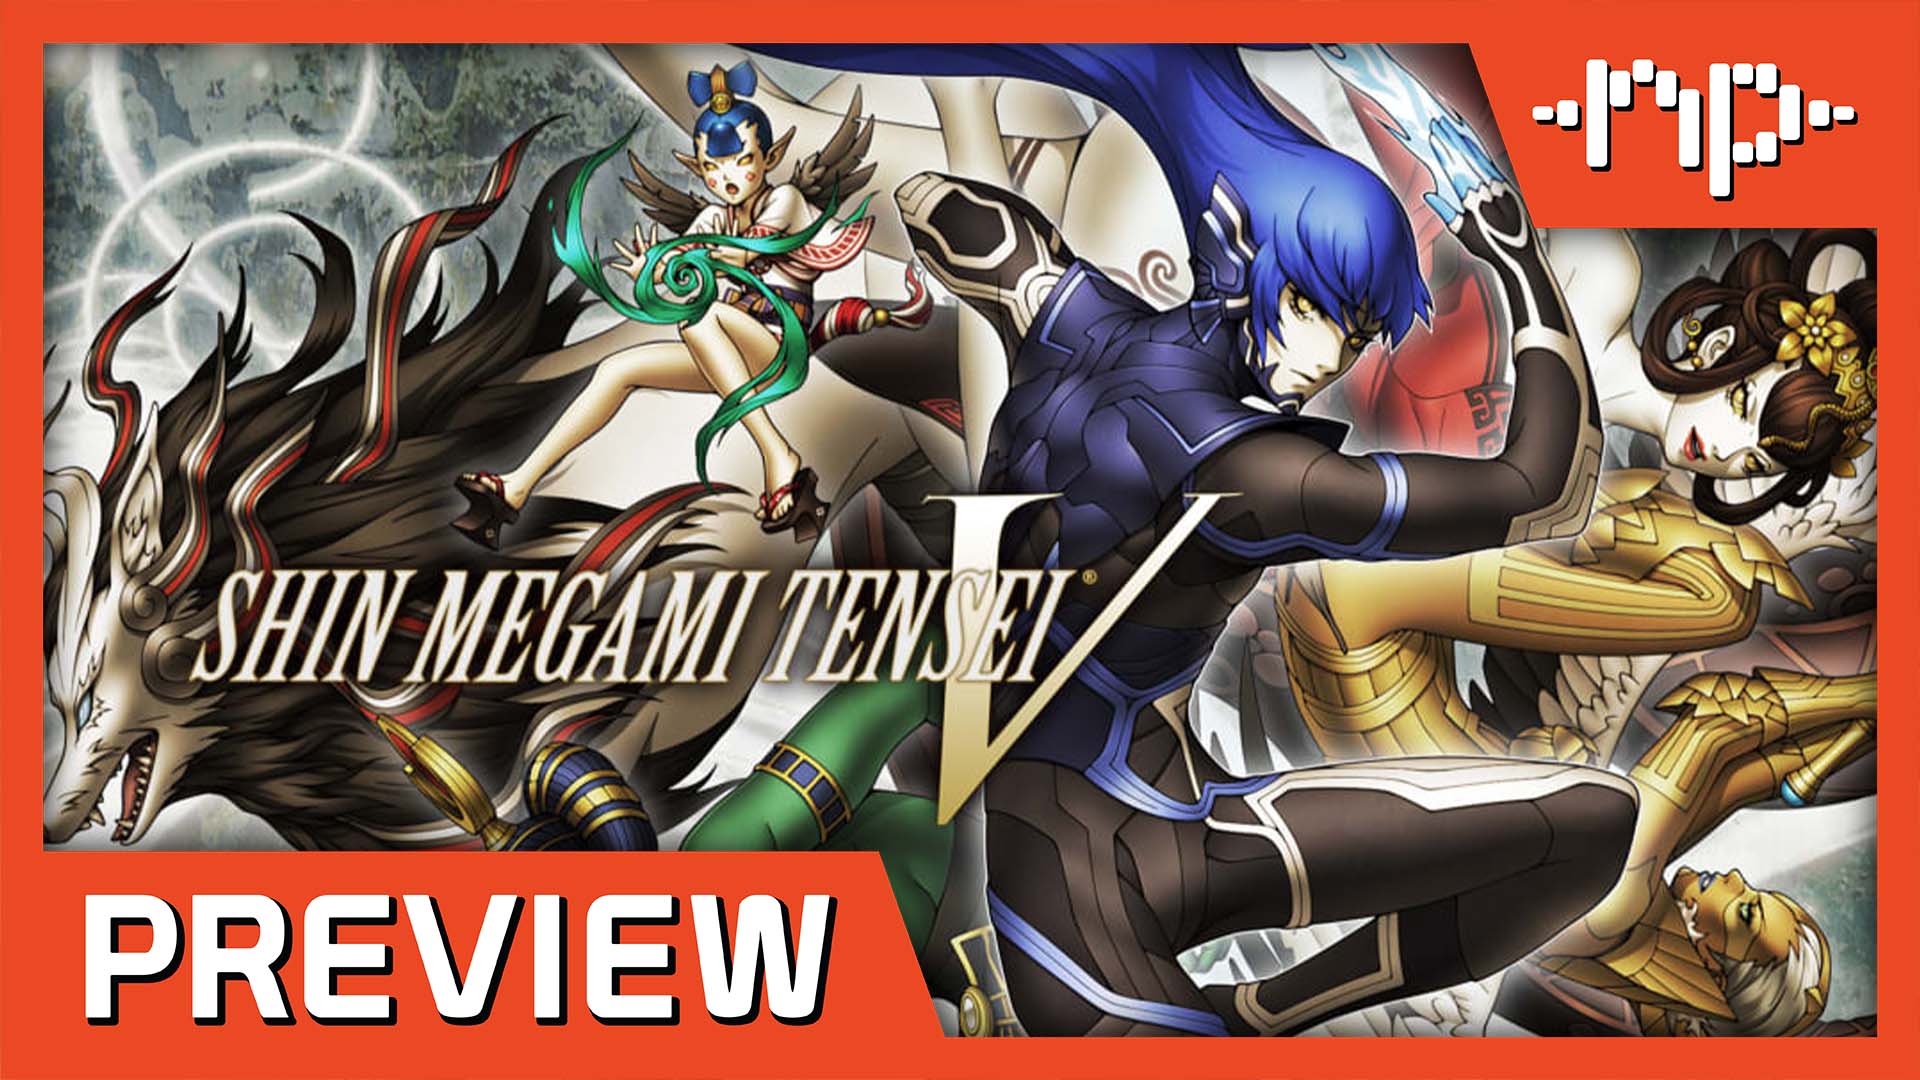 Shin Megami Tensei V Sets an Isekai Stage to Deliver a Much Anticipated SMT Experience